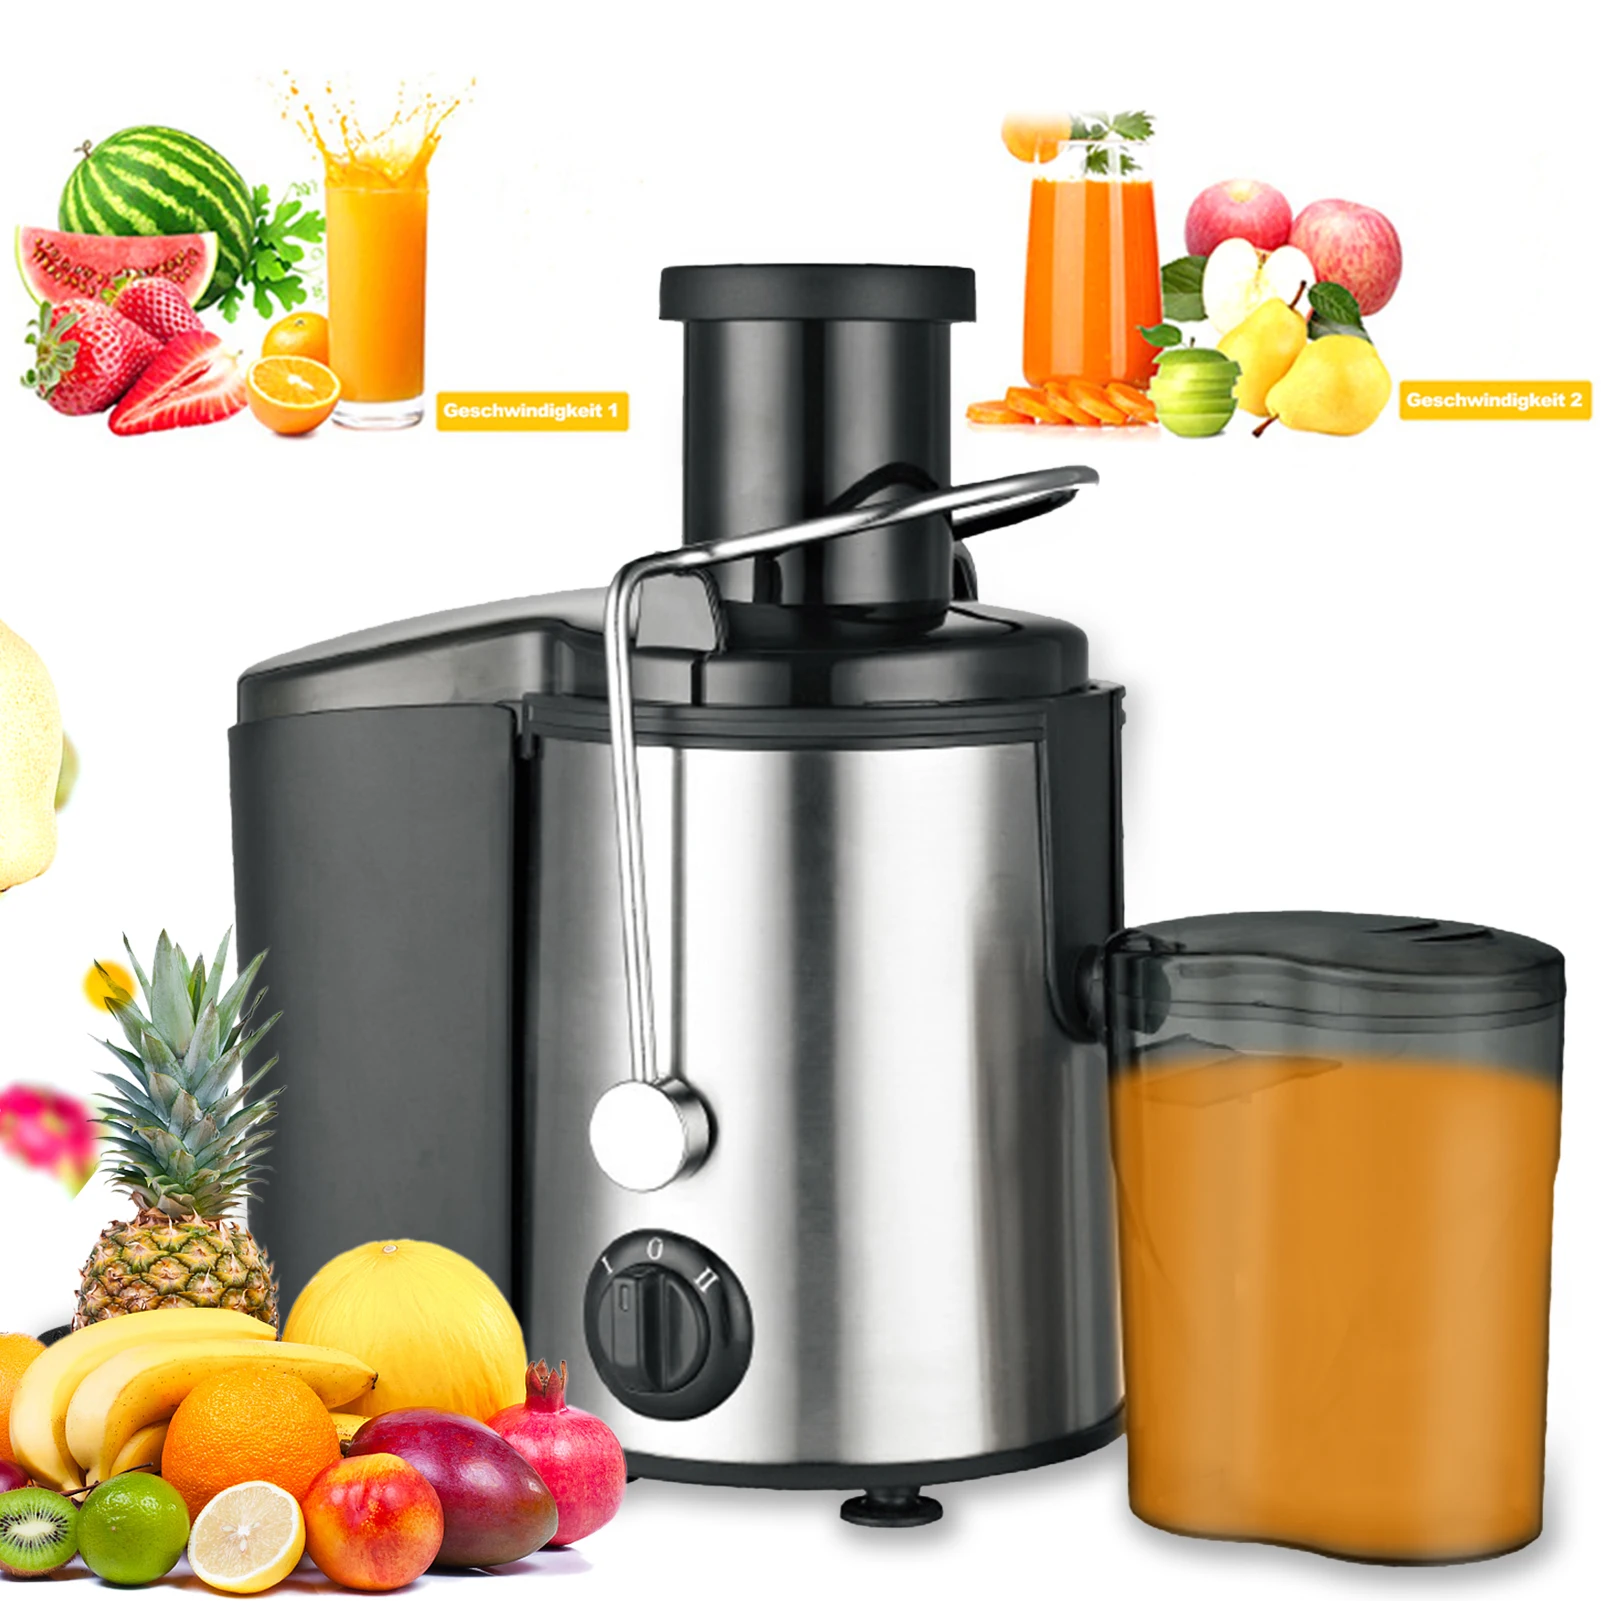 

800W Blenders Electric Blender Juicer Machine Extractor Centrifugal Juicers Anti-Drip 2 Speed with Juice Jug and Pulp Container